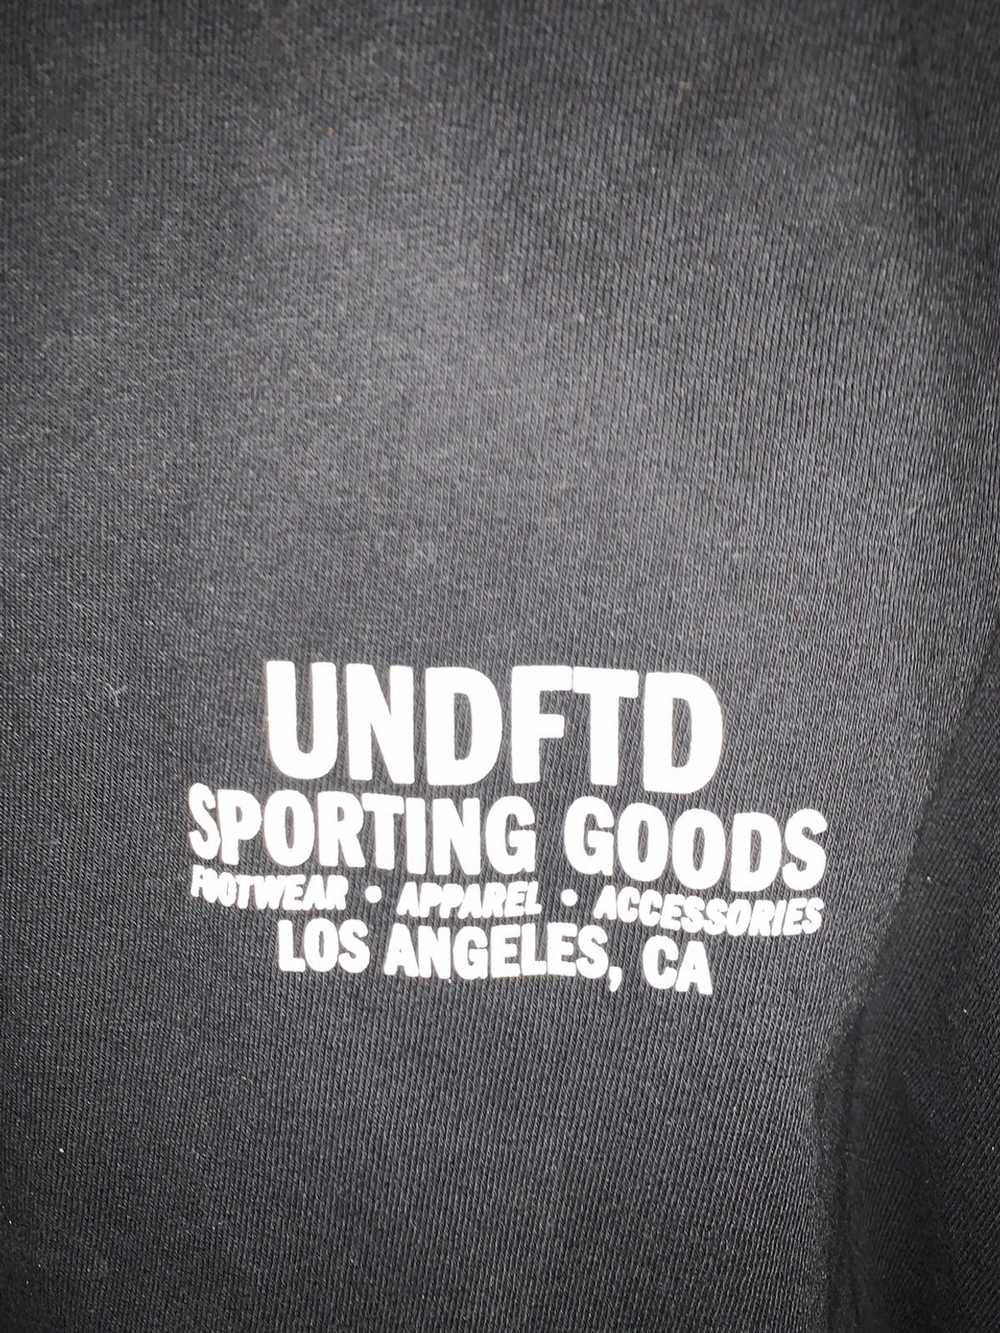 Undefeated Undefeated Sporting Goods T-Shirt - image 2